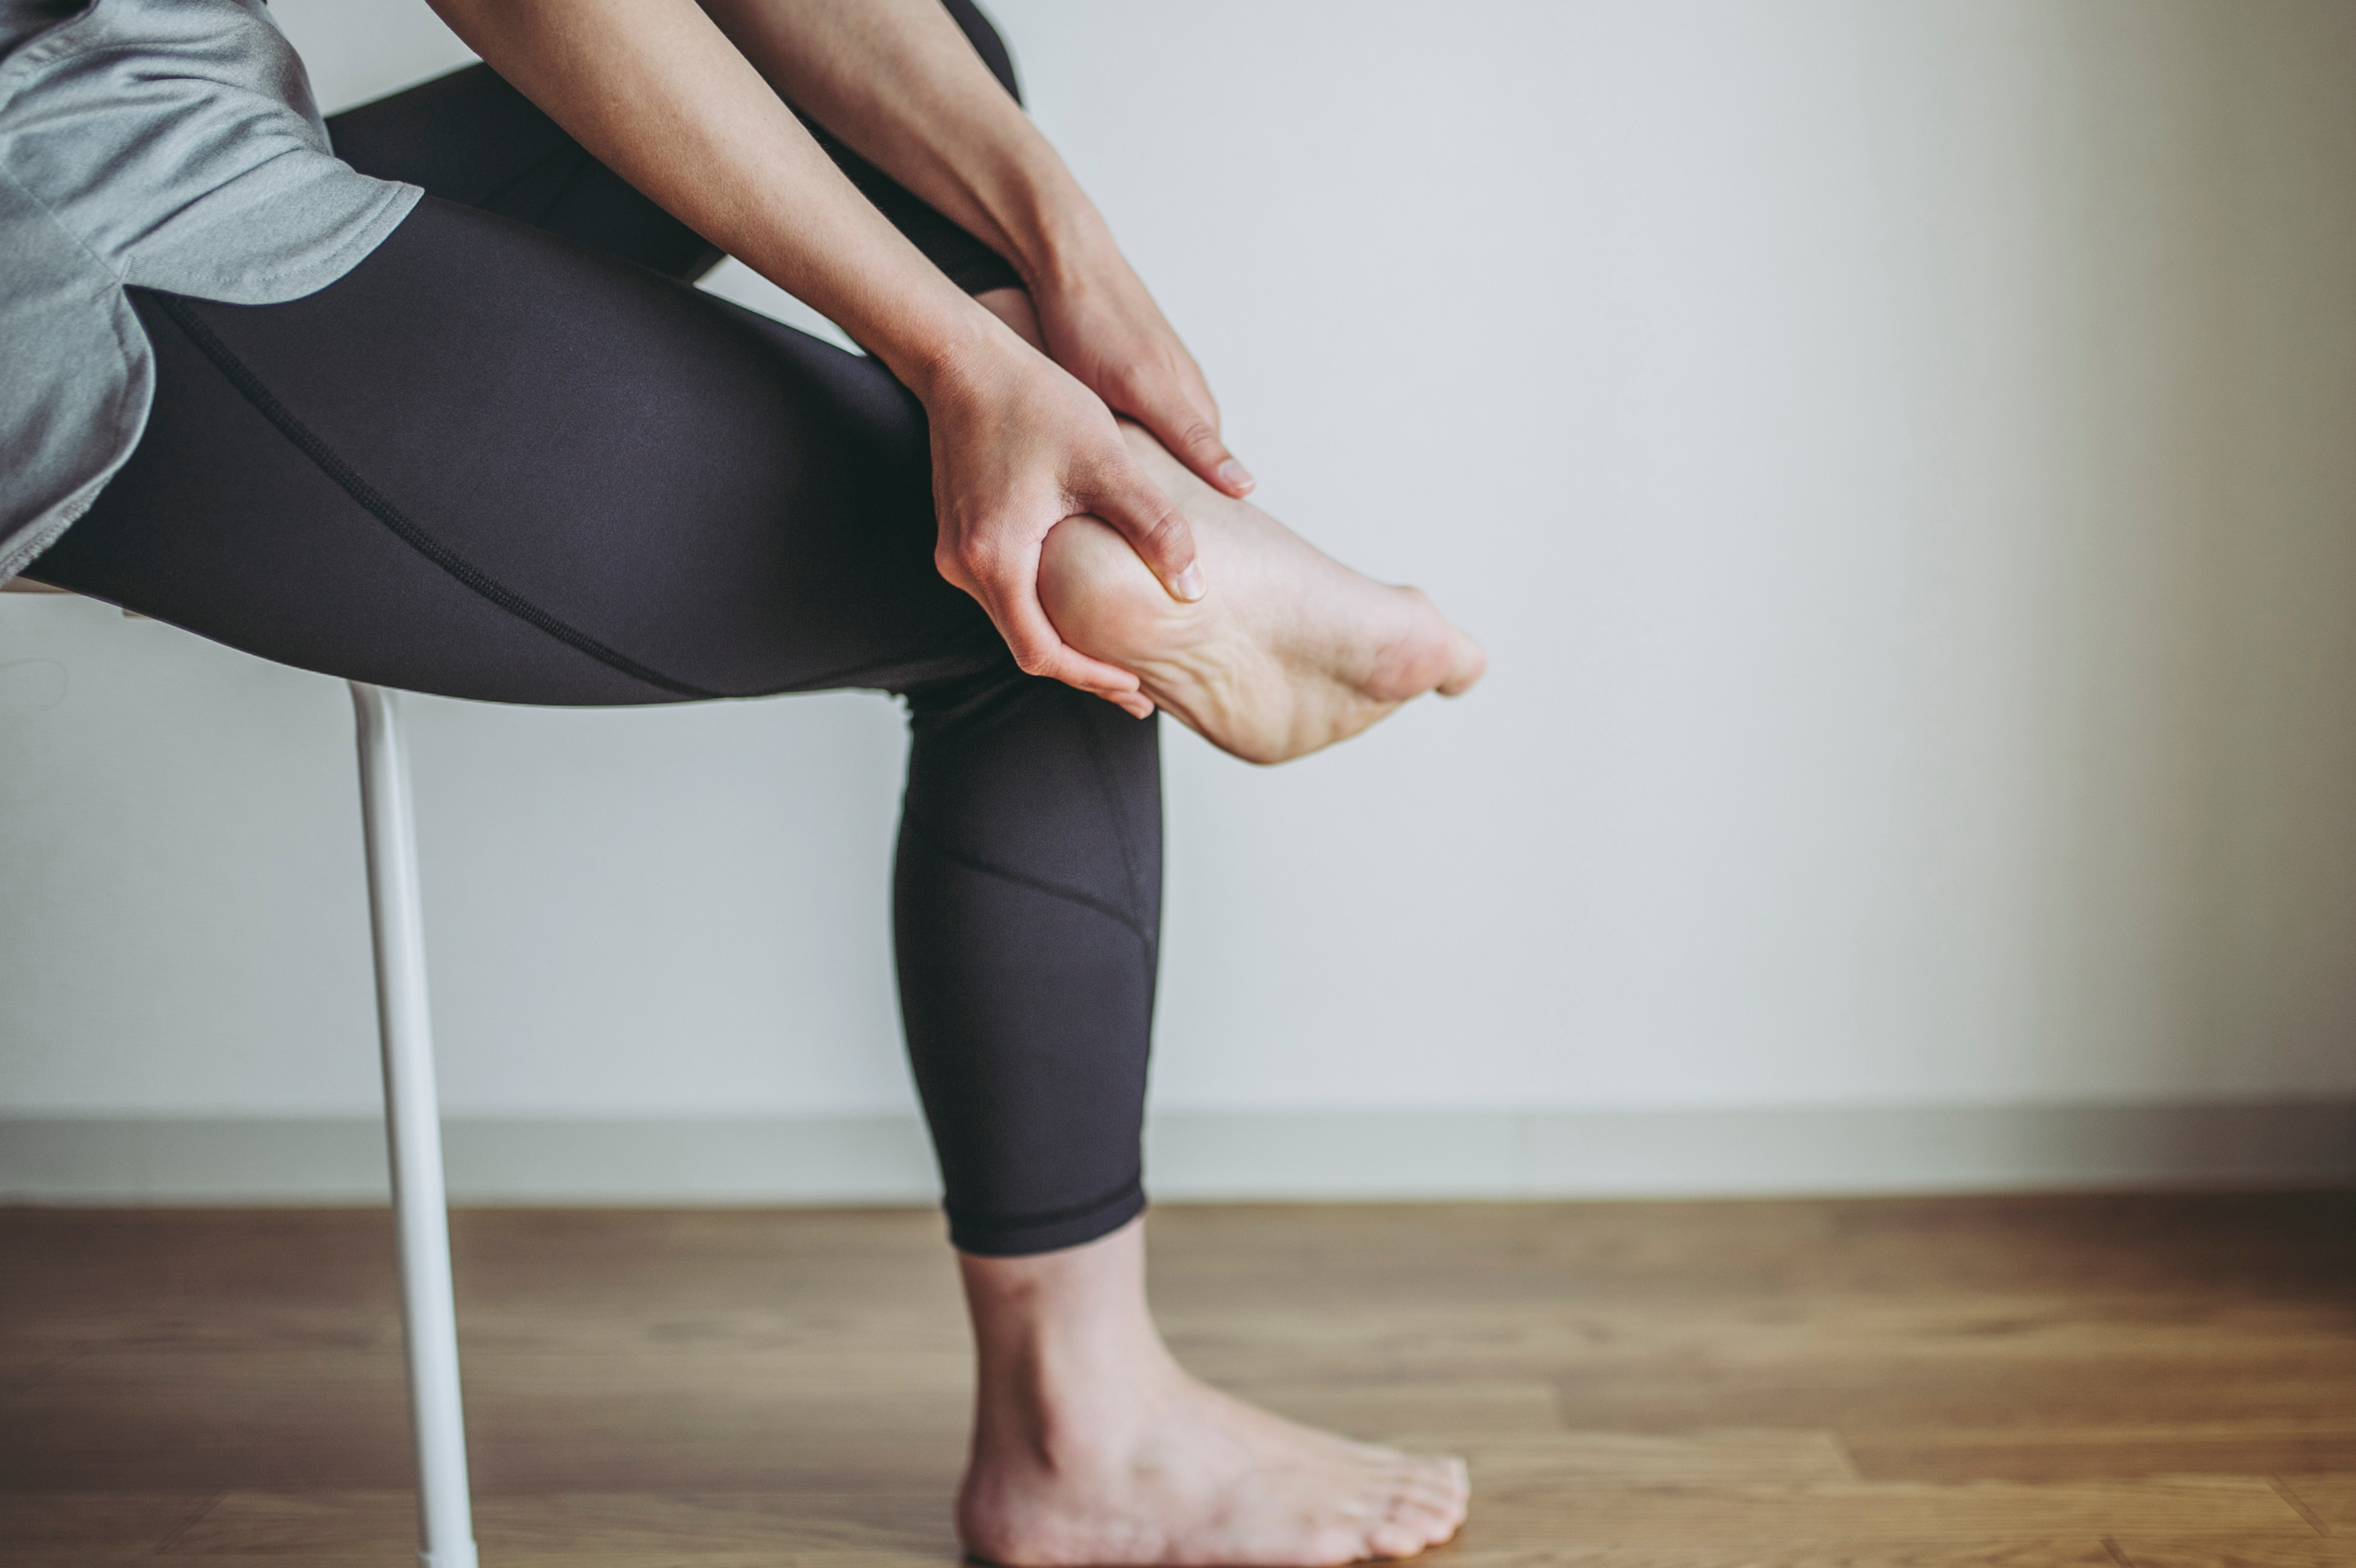 Learn what causes plantar fasciitis to flare up.